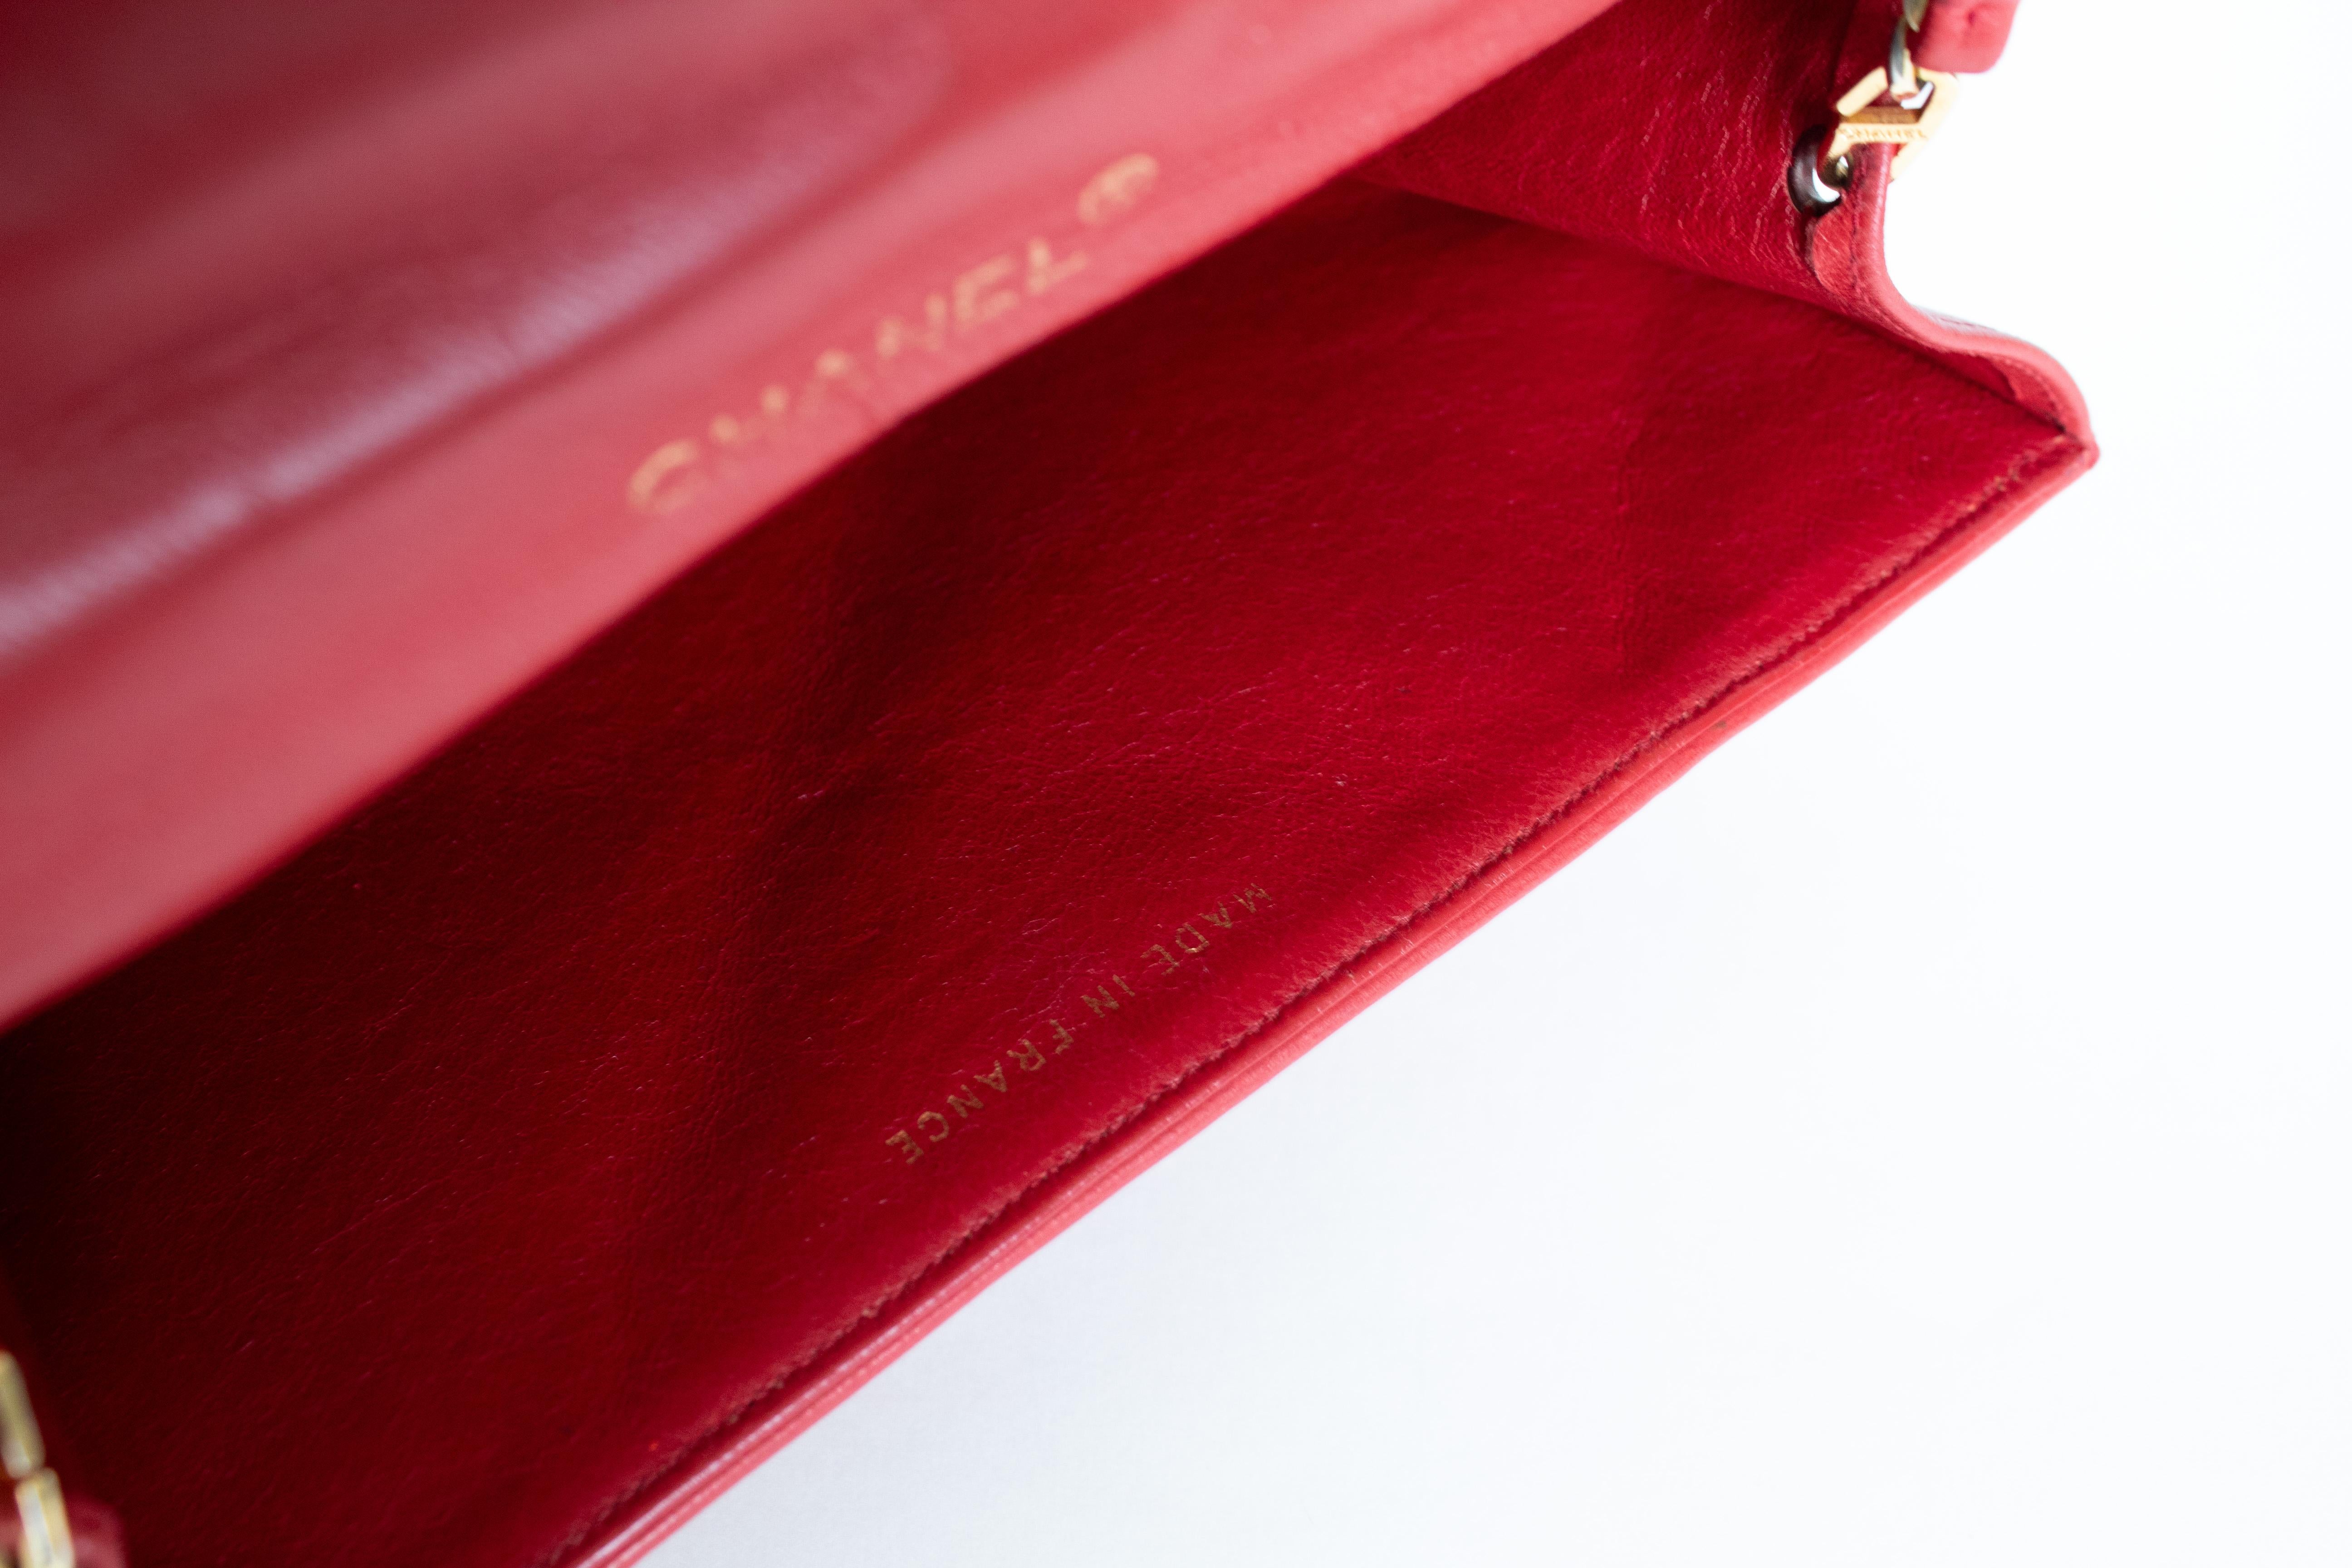 Classic Chanel 19 Vintage Rare 90s Jumbo Lambskin Red Envelope Flap Bag  For Sale 6